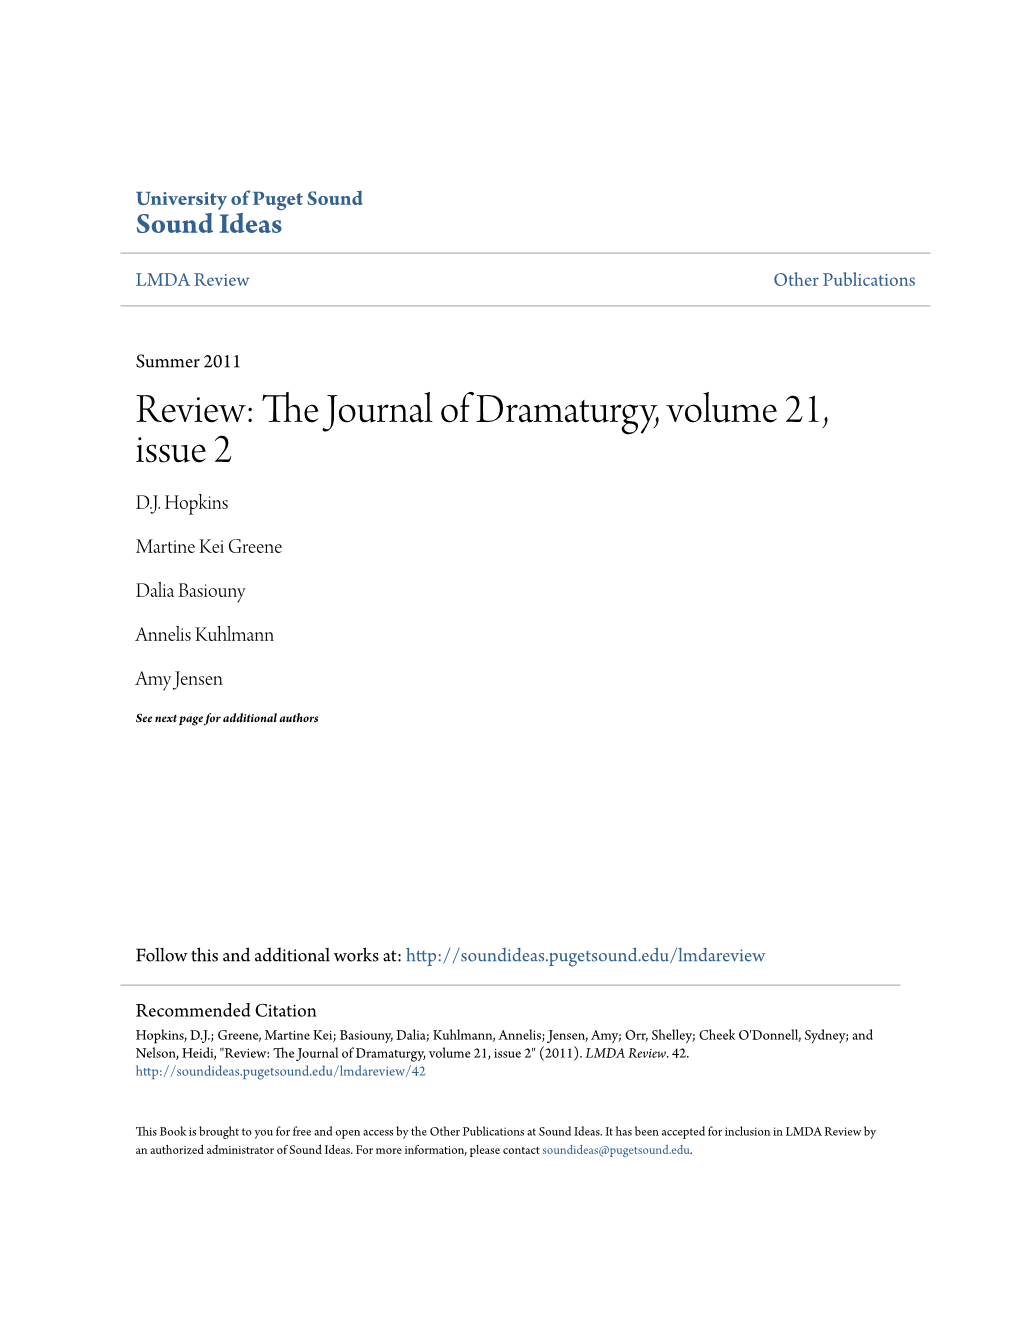 Review: the Journal of Dramaturgy, Volume 21, Issue 2